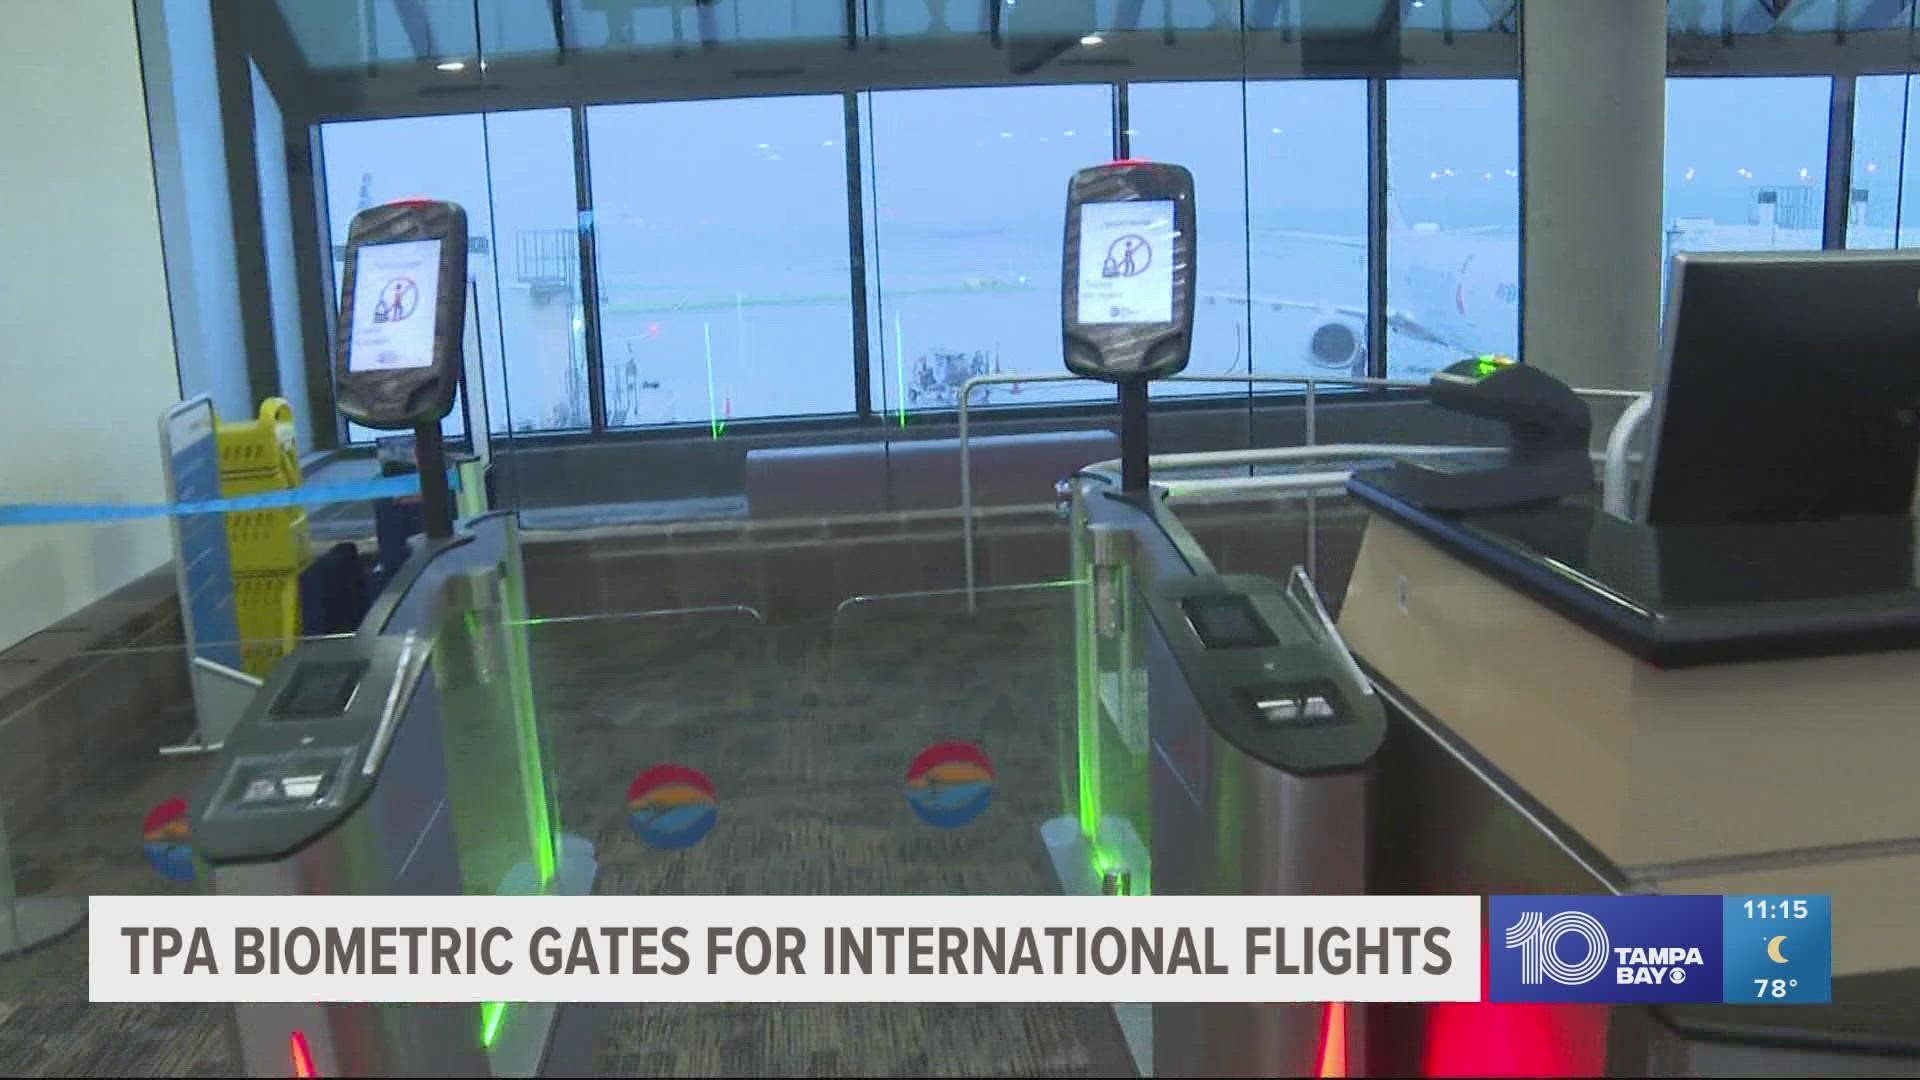 Tampa International Airport says the devices can significantly reduce boarding time for international flights.